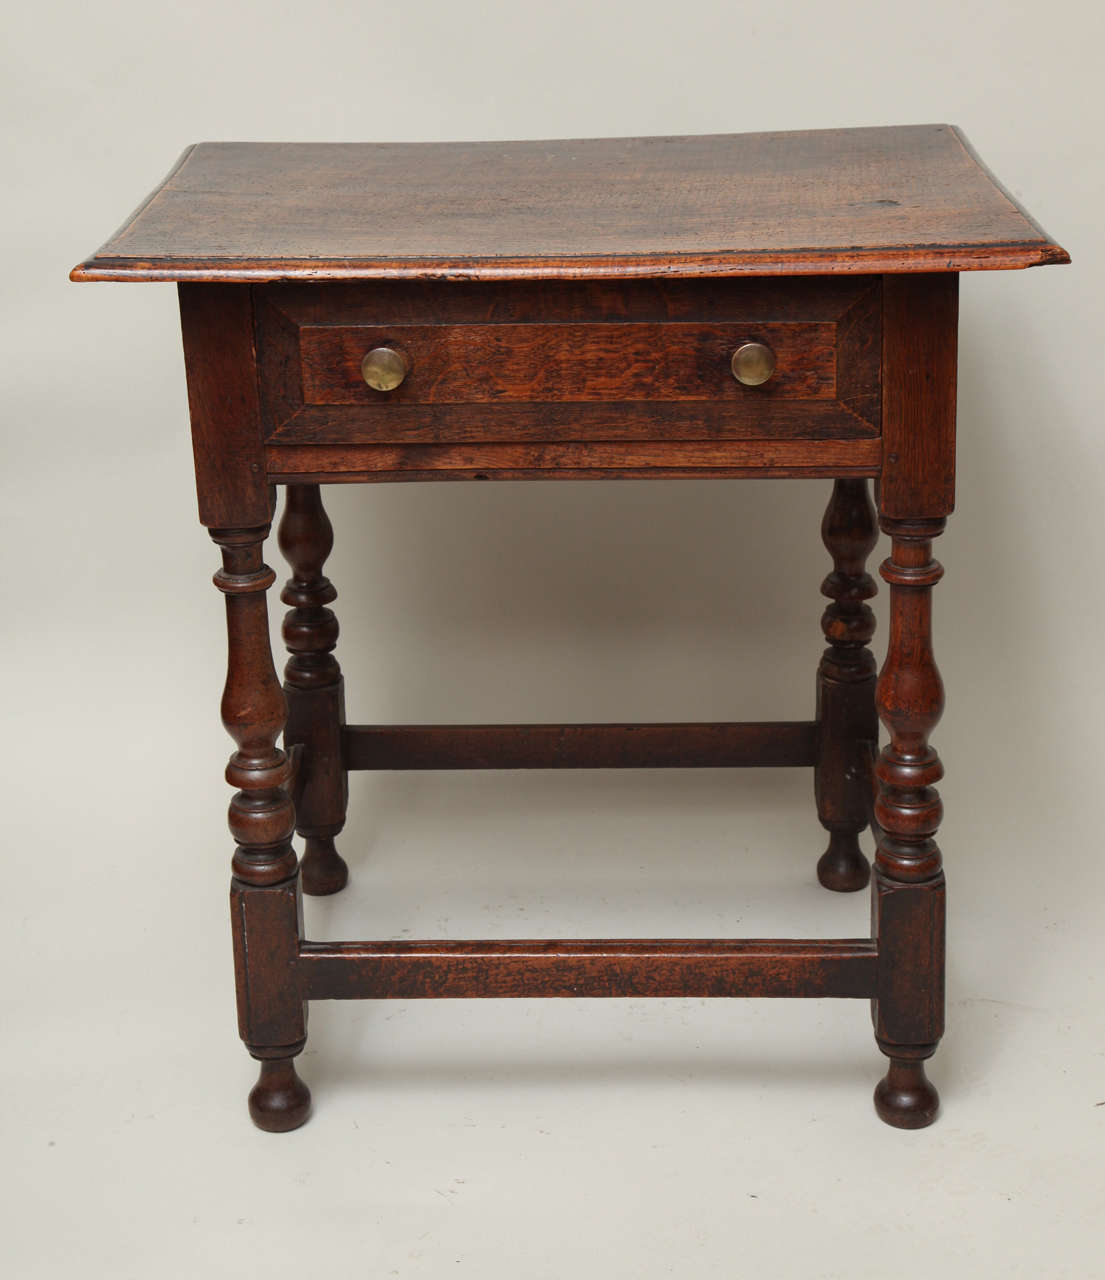 Very good late 17th century English ash and oak side table, the single plank tiger ash top with thumb molded edge, over single drawer with chamfered edge, over boldly turned balustrade legs with beaded edge and original bun feet, joined by beaded